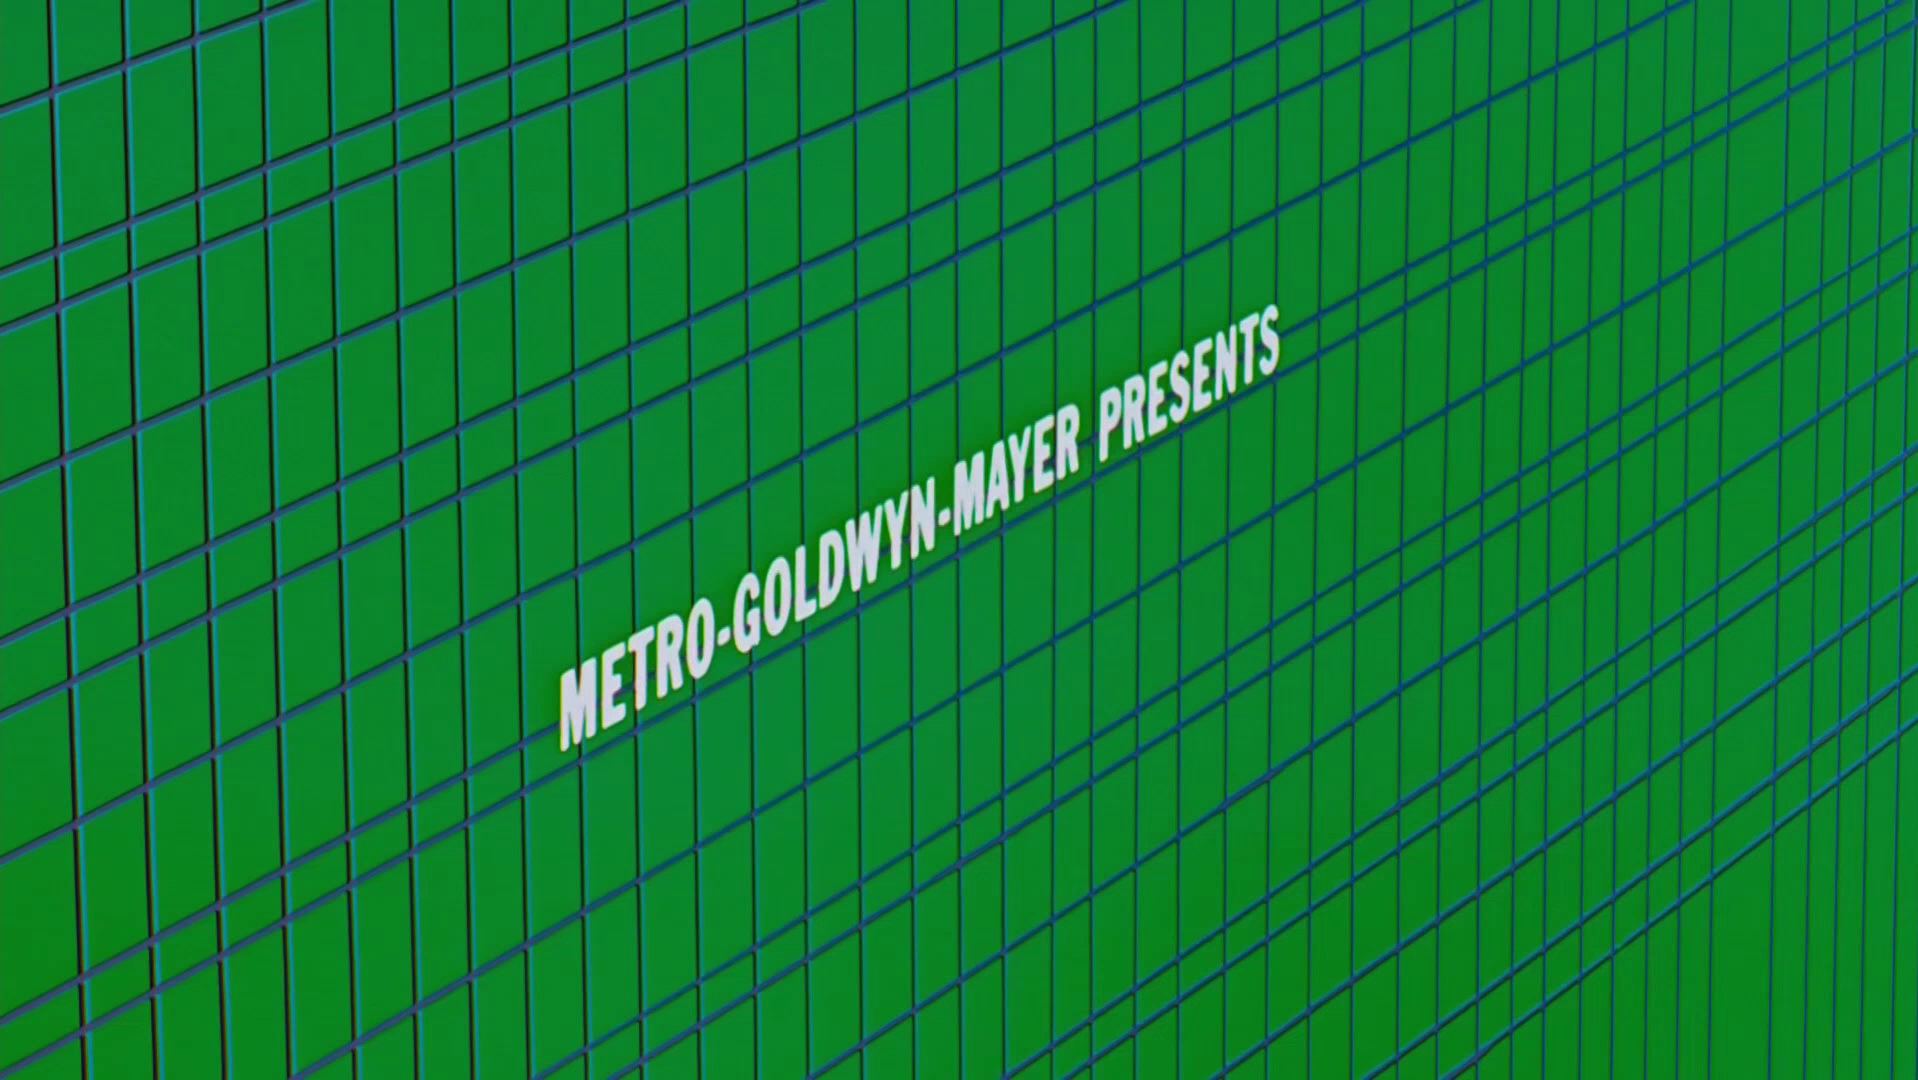 Main title from North by Northwest (1959) (2). Metro-Goldwyn-Mayer presents